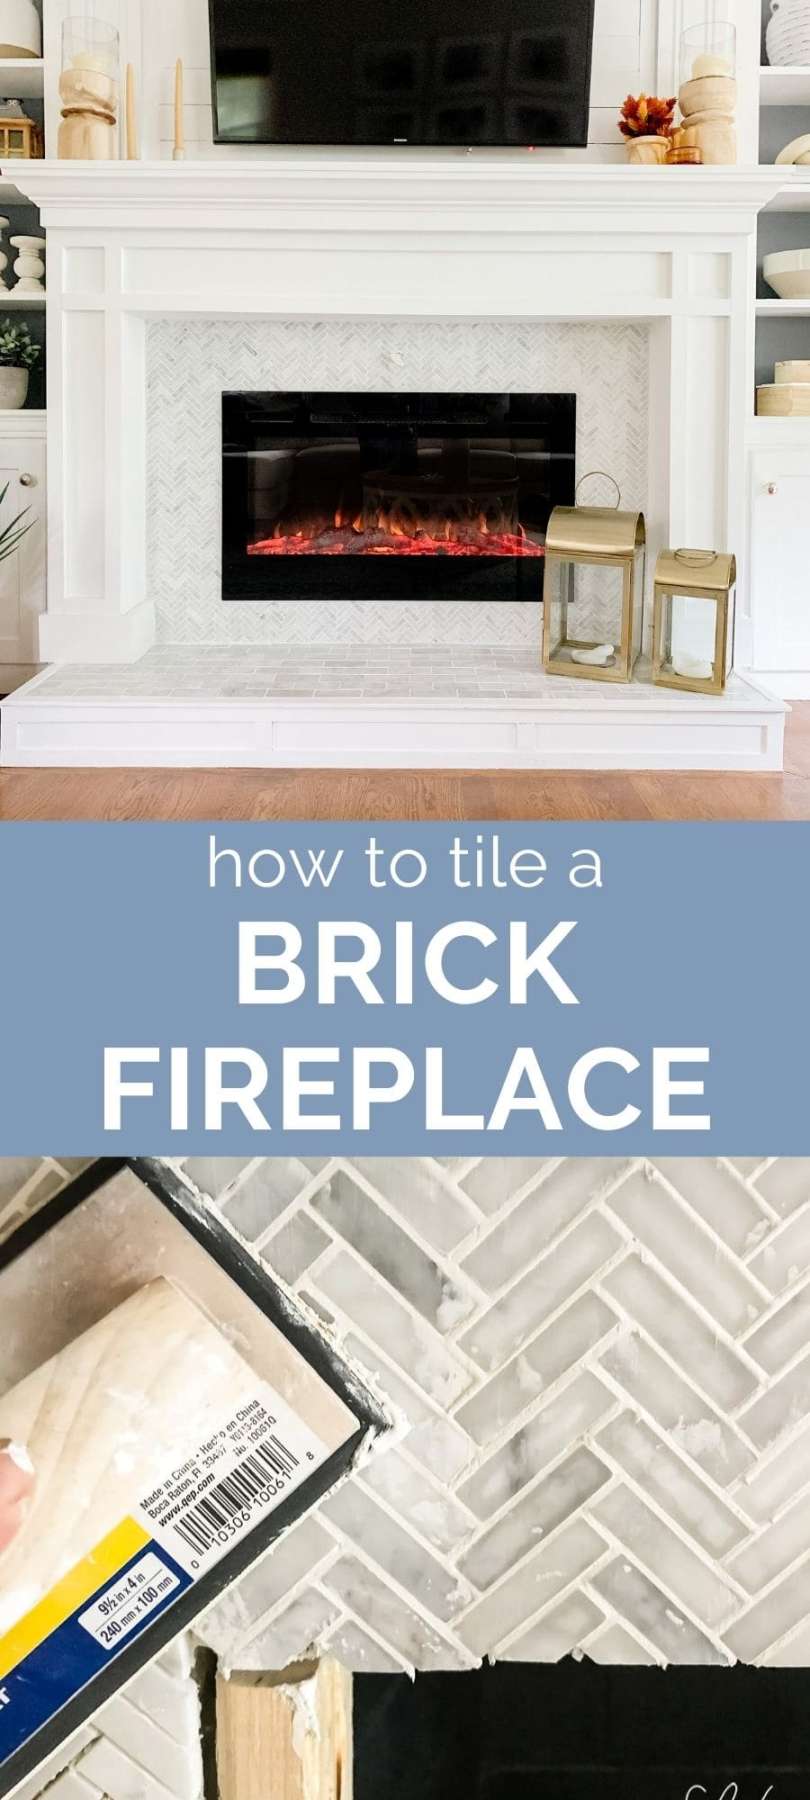 How to Tile a Brick Fireplace - Jenna Kate at Home